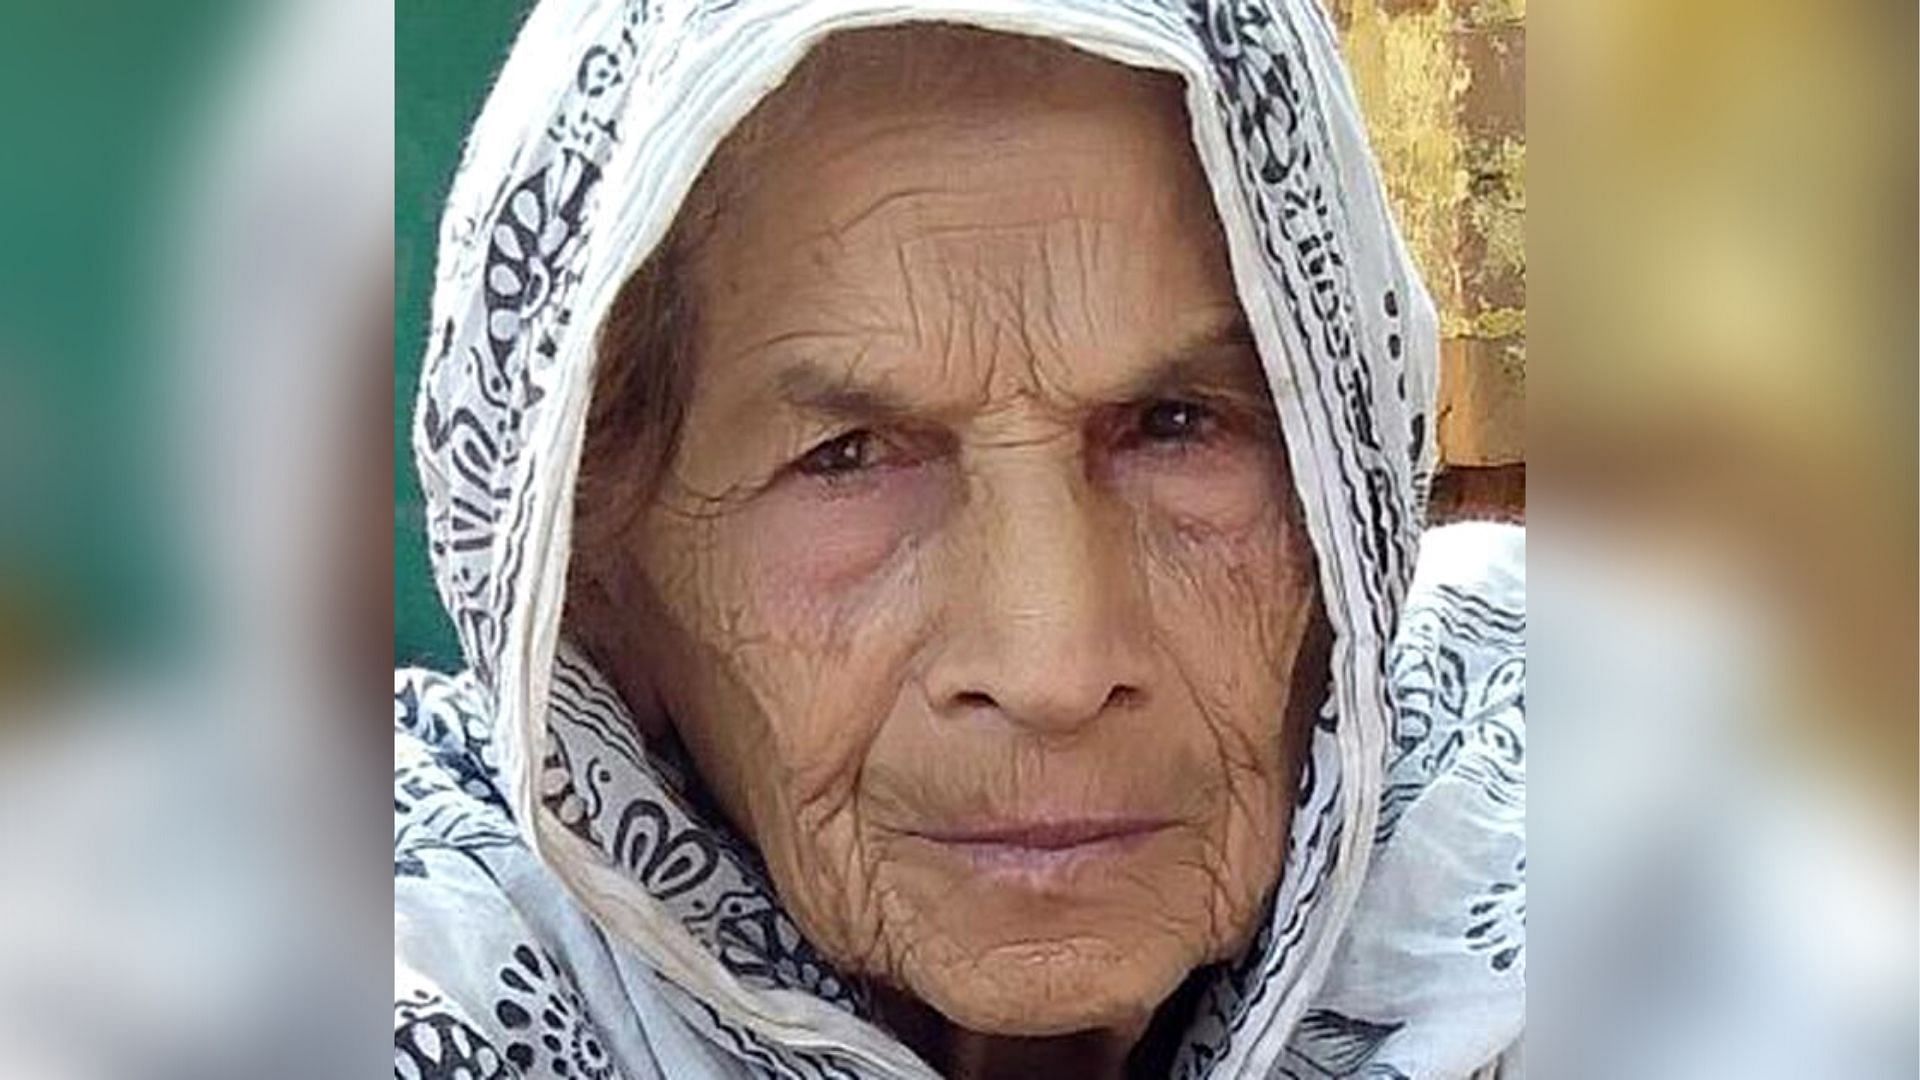 85-year-old Akbari died in the fire.